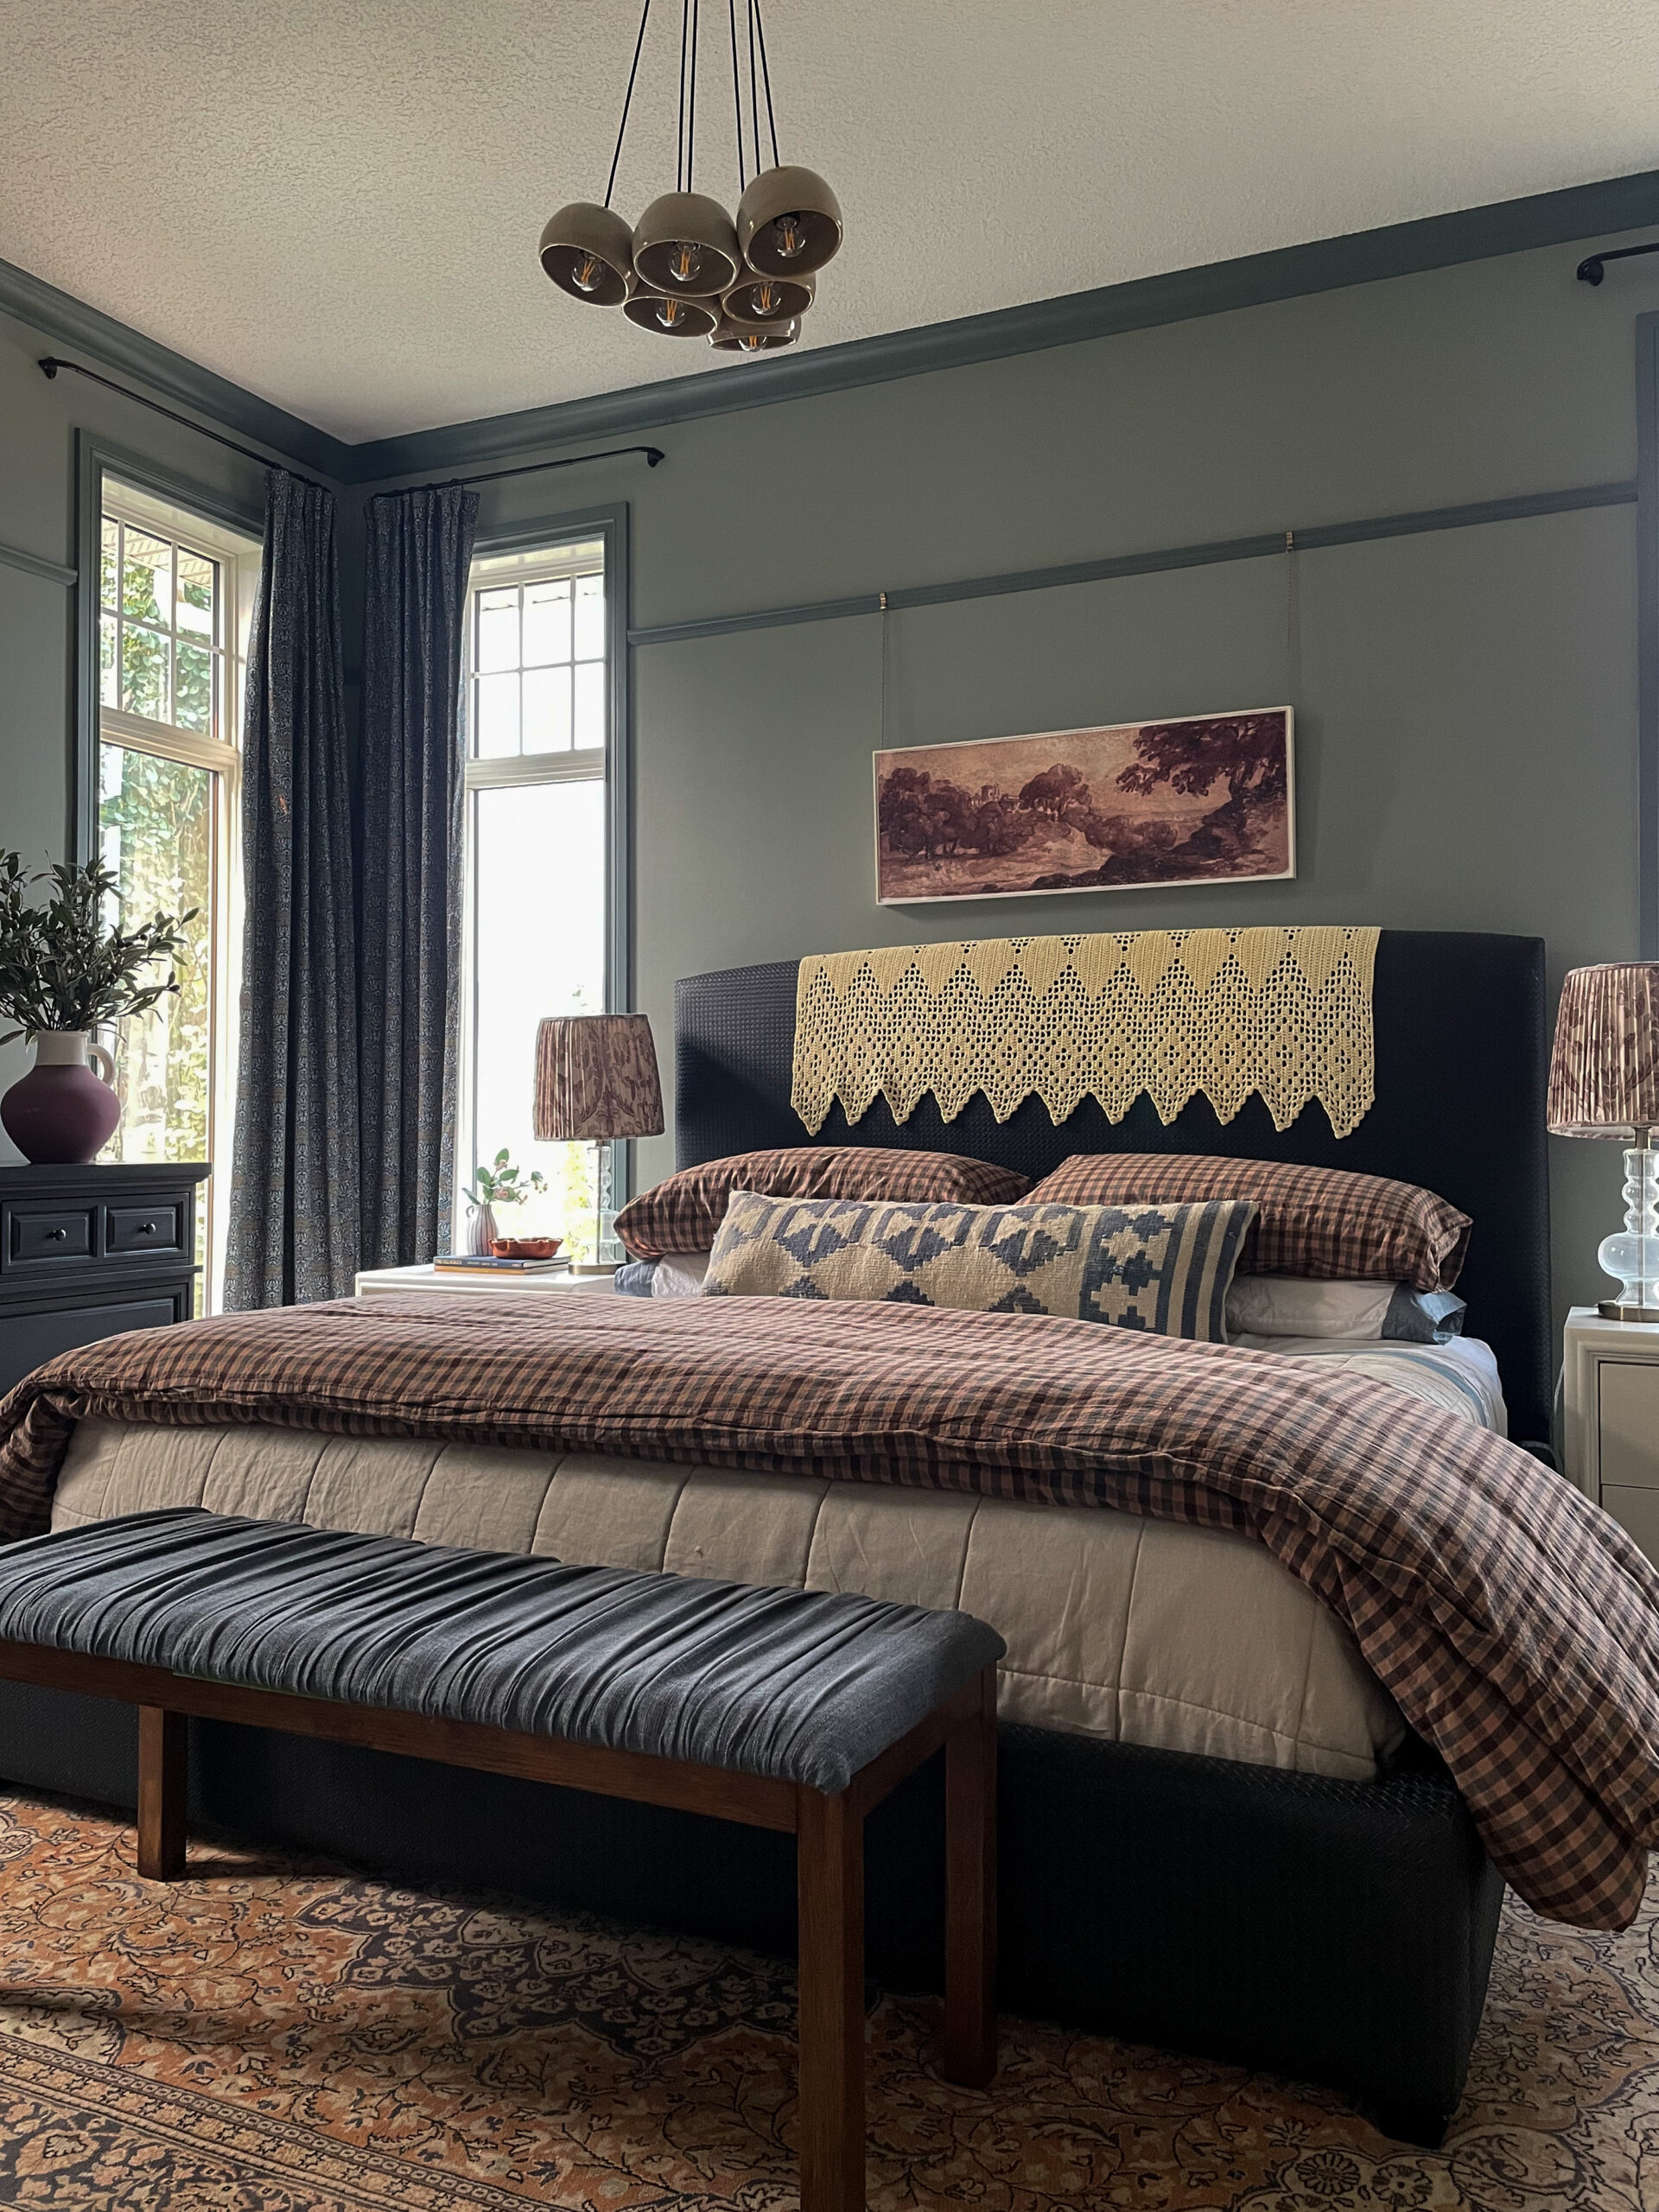 Bedroom with green walls with darker green trim, picture rail, two windows and floral curtains, beige and checkered bedding, afghan over black headboard on bed, art over bed and white nightstands with glass lamps with pleated floral shades